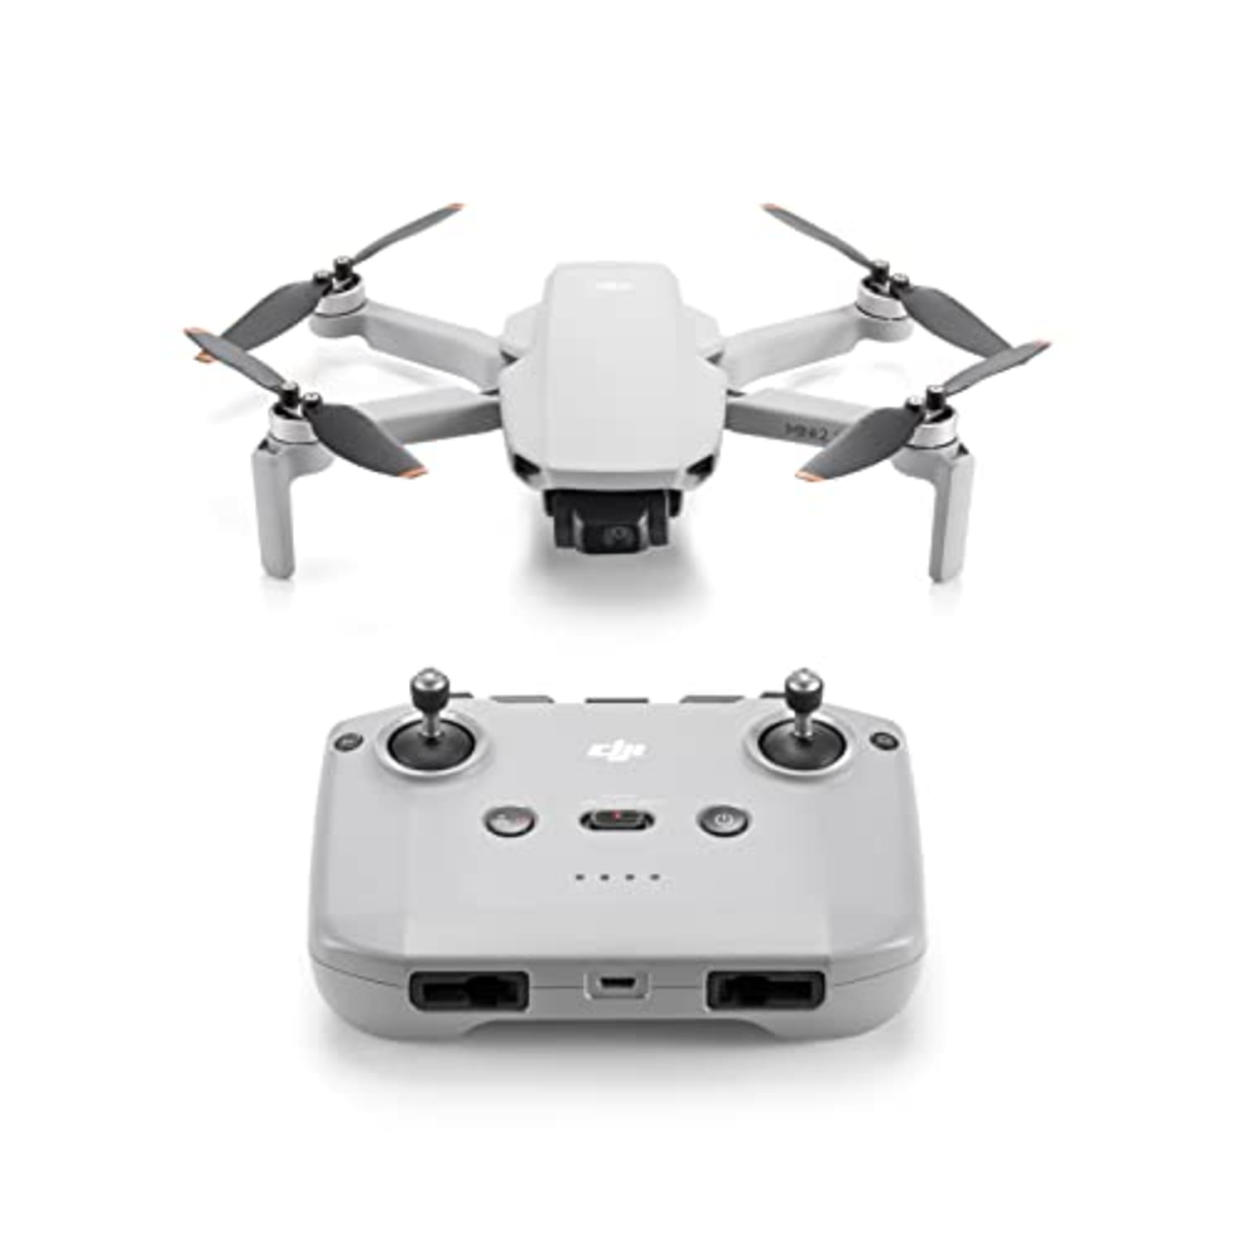 DJI Mini 2 SE, Lightweight and Foldable Mini Drone with QHD Video, 10km Video Transmission, 31-min Flight Time, Under 249 g, Return to Home, Automatic Pro Shots, Drone with Camera for Beginners (AMAZON)